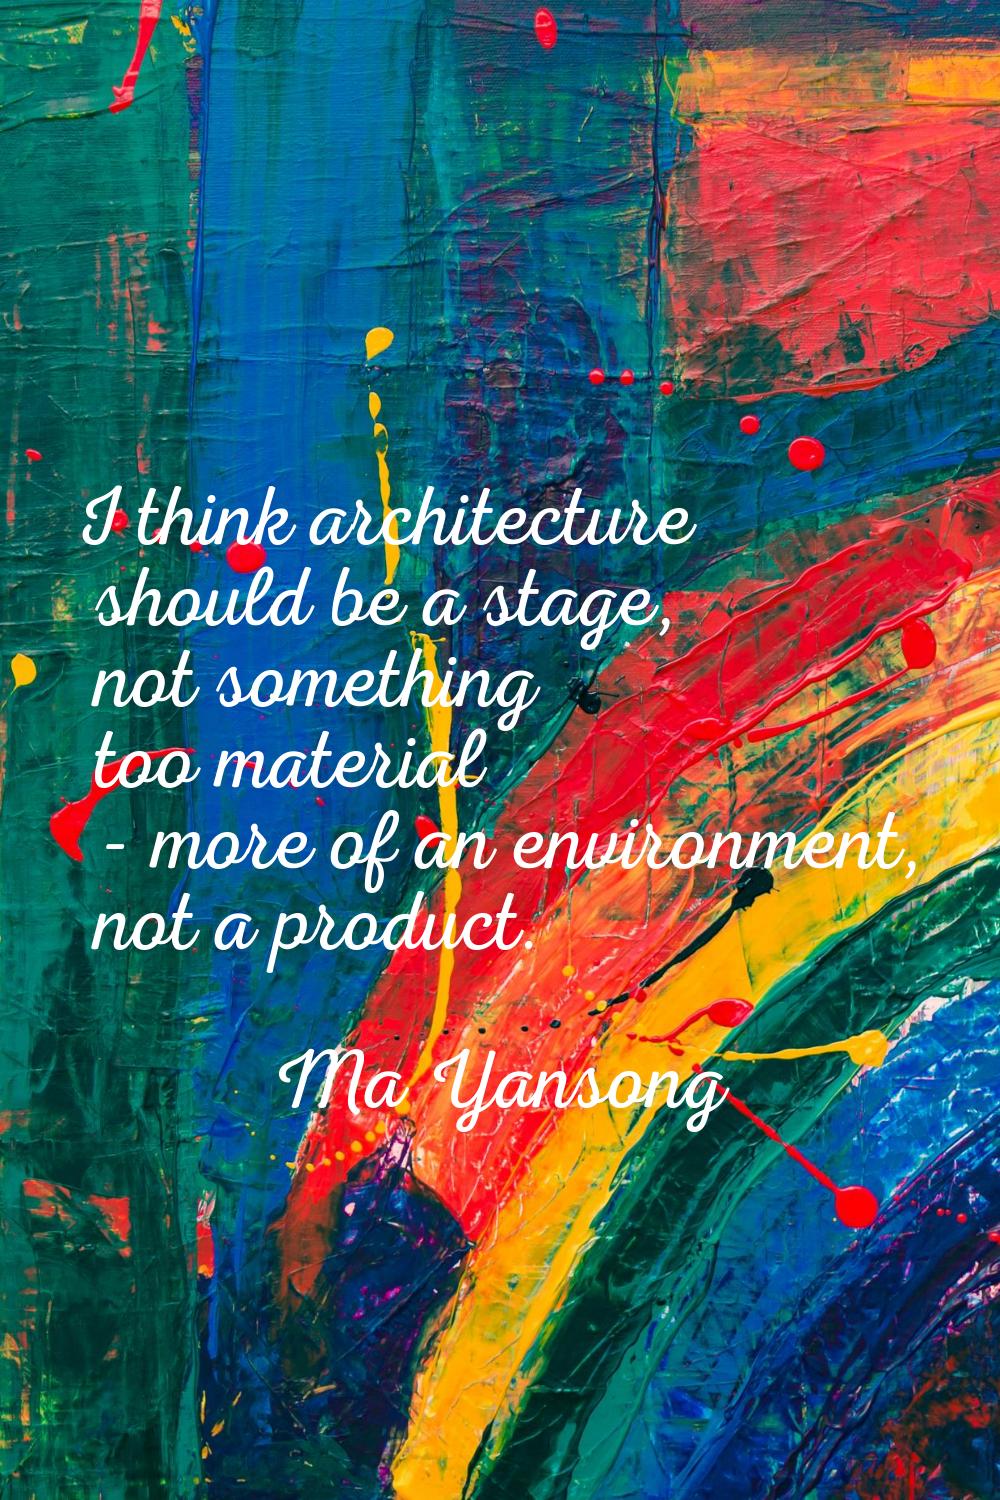 I think architecture should be a stage, not something too material - more of an environment, not a 